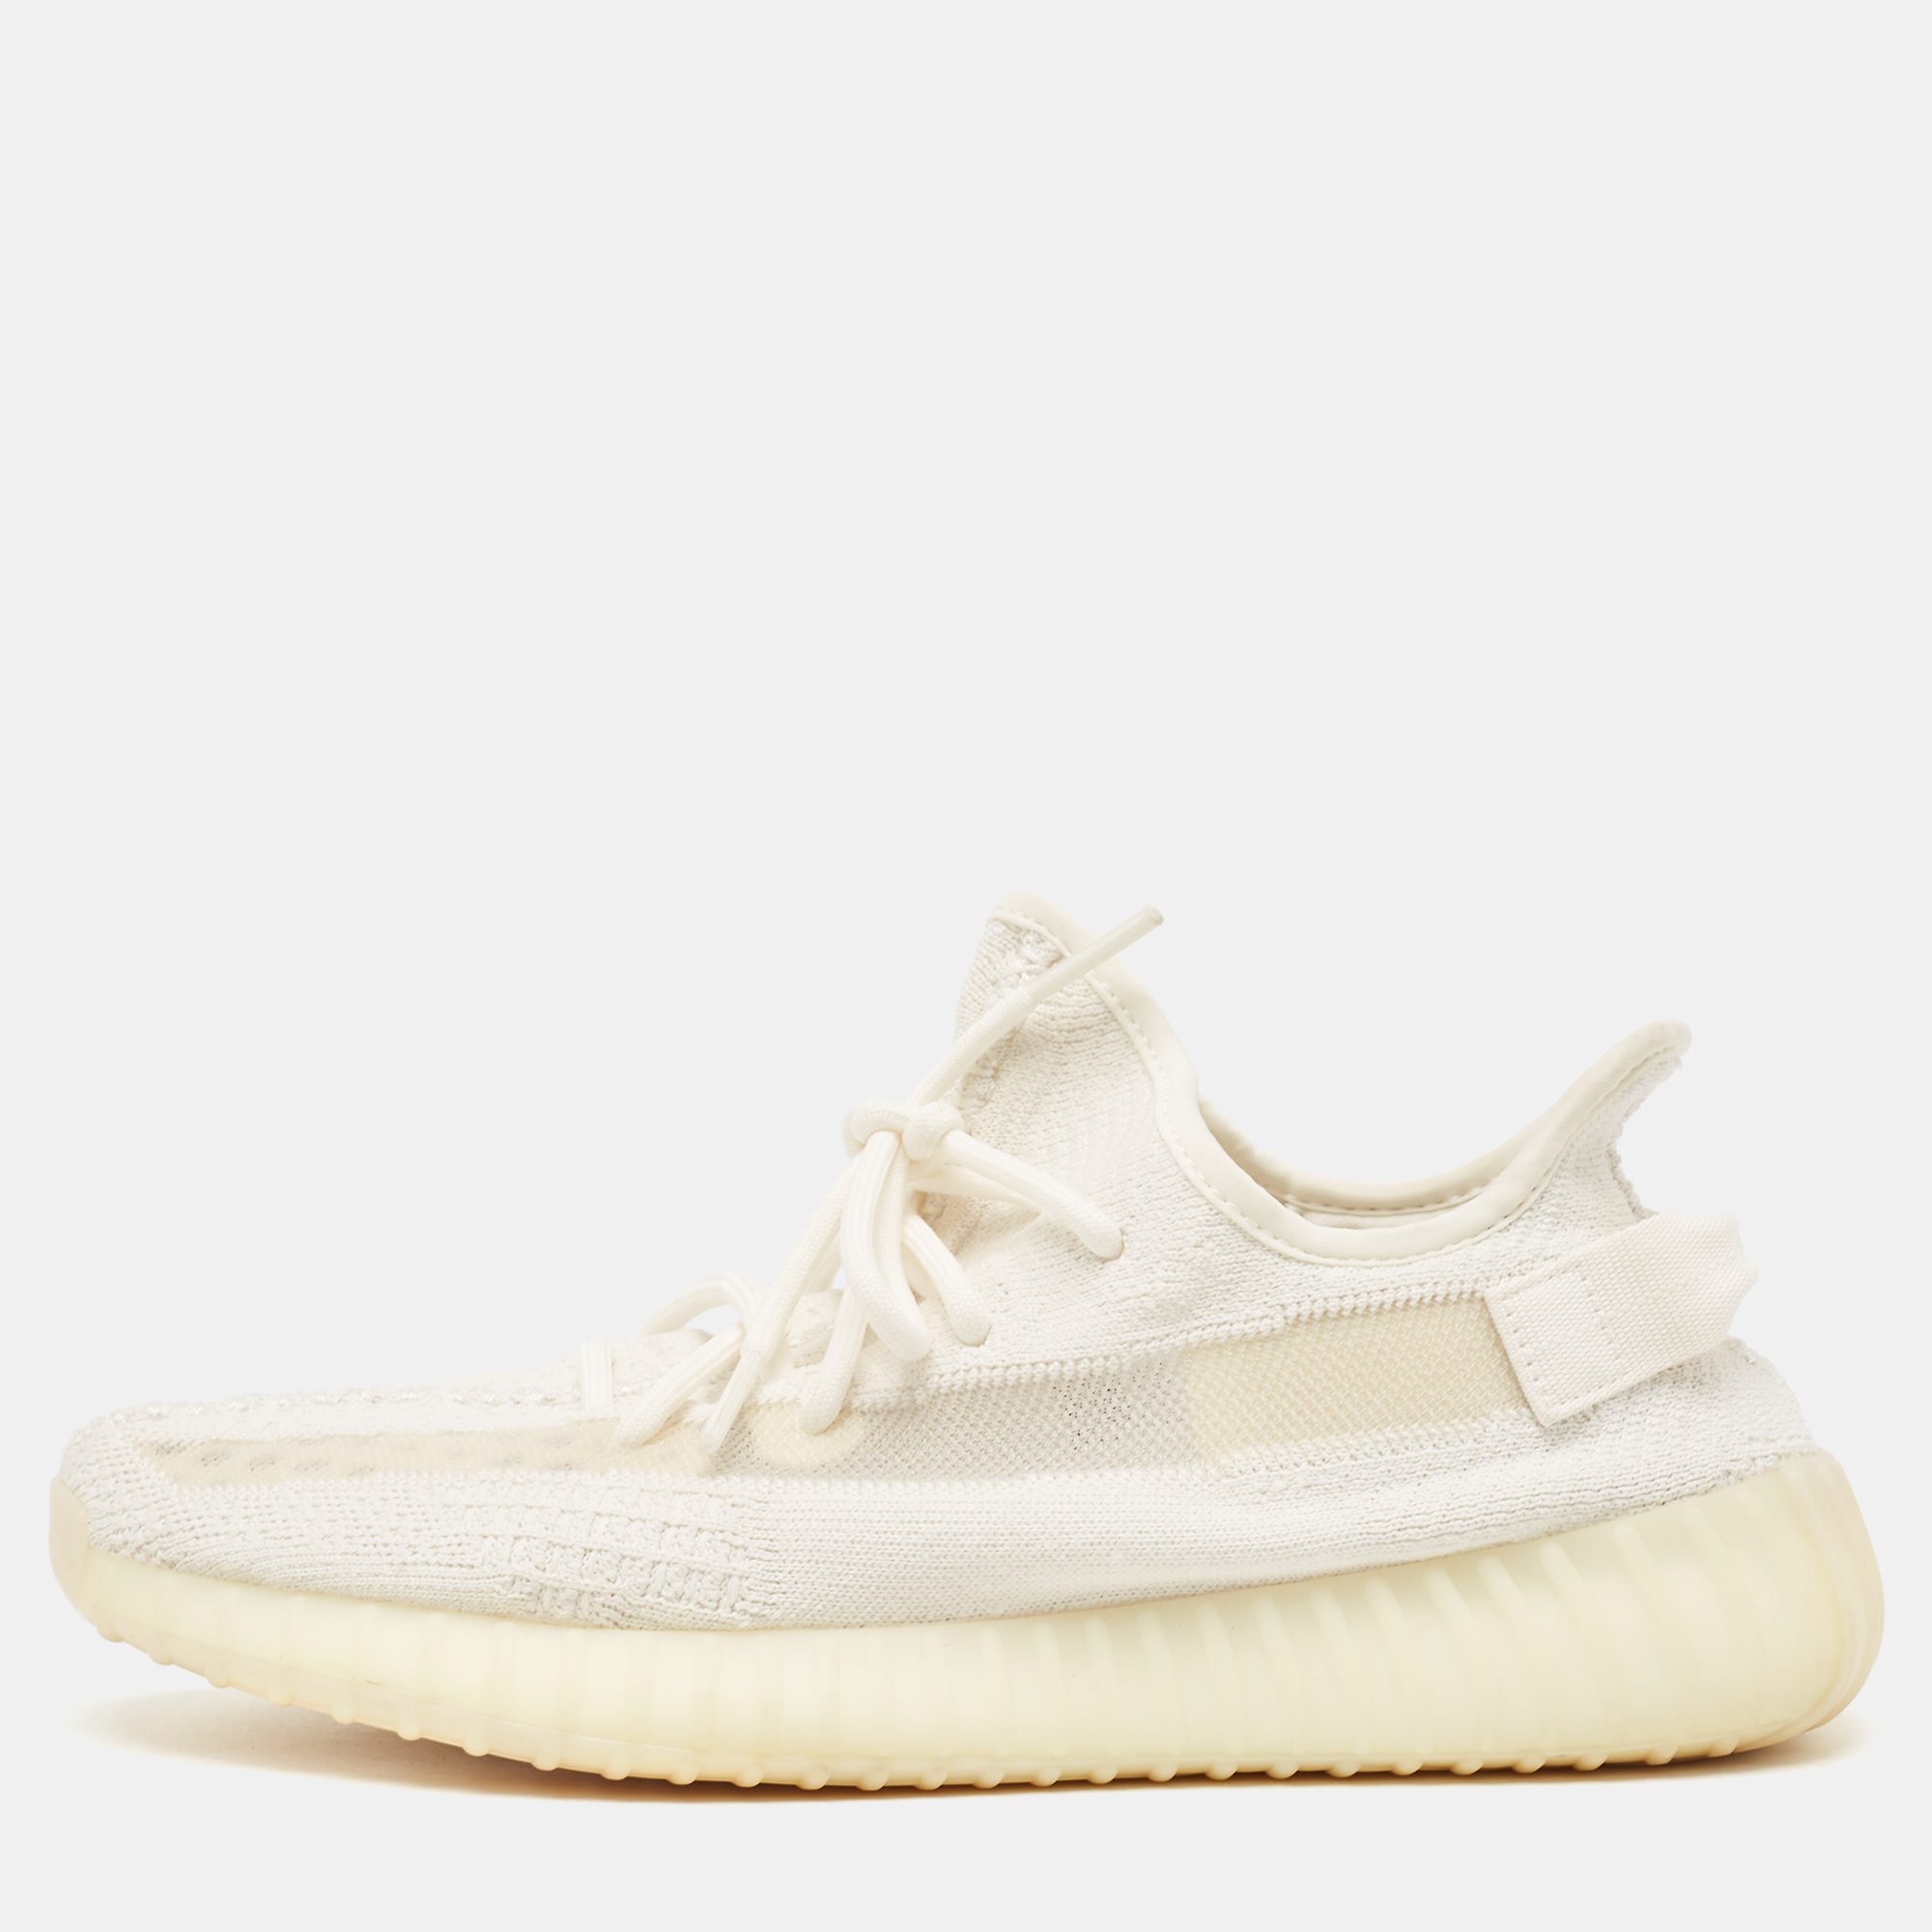 

Yeezy x Adidas Off -White Knit Fabric Boost 350 V2 Bone Sneakers Size 45 1/3